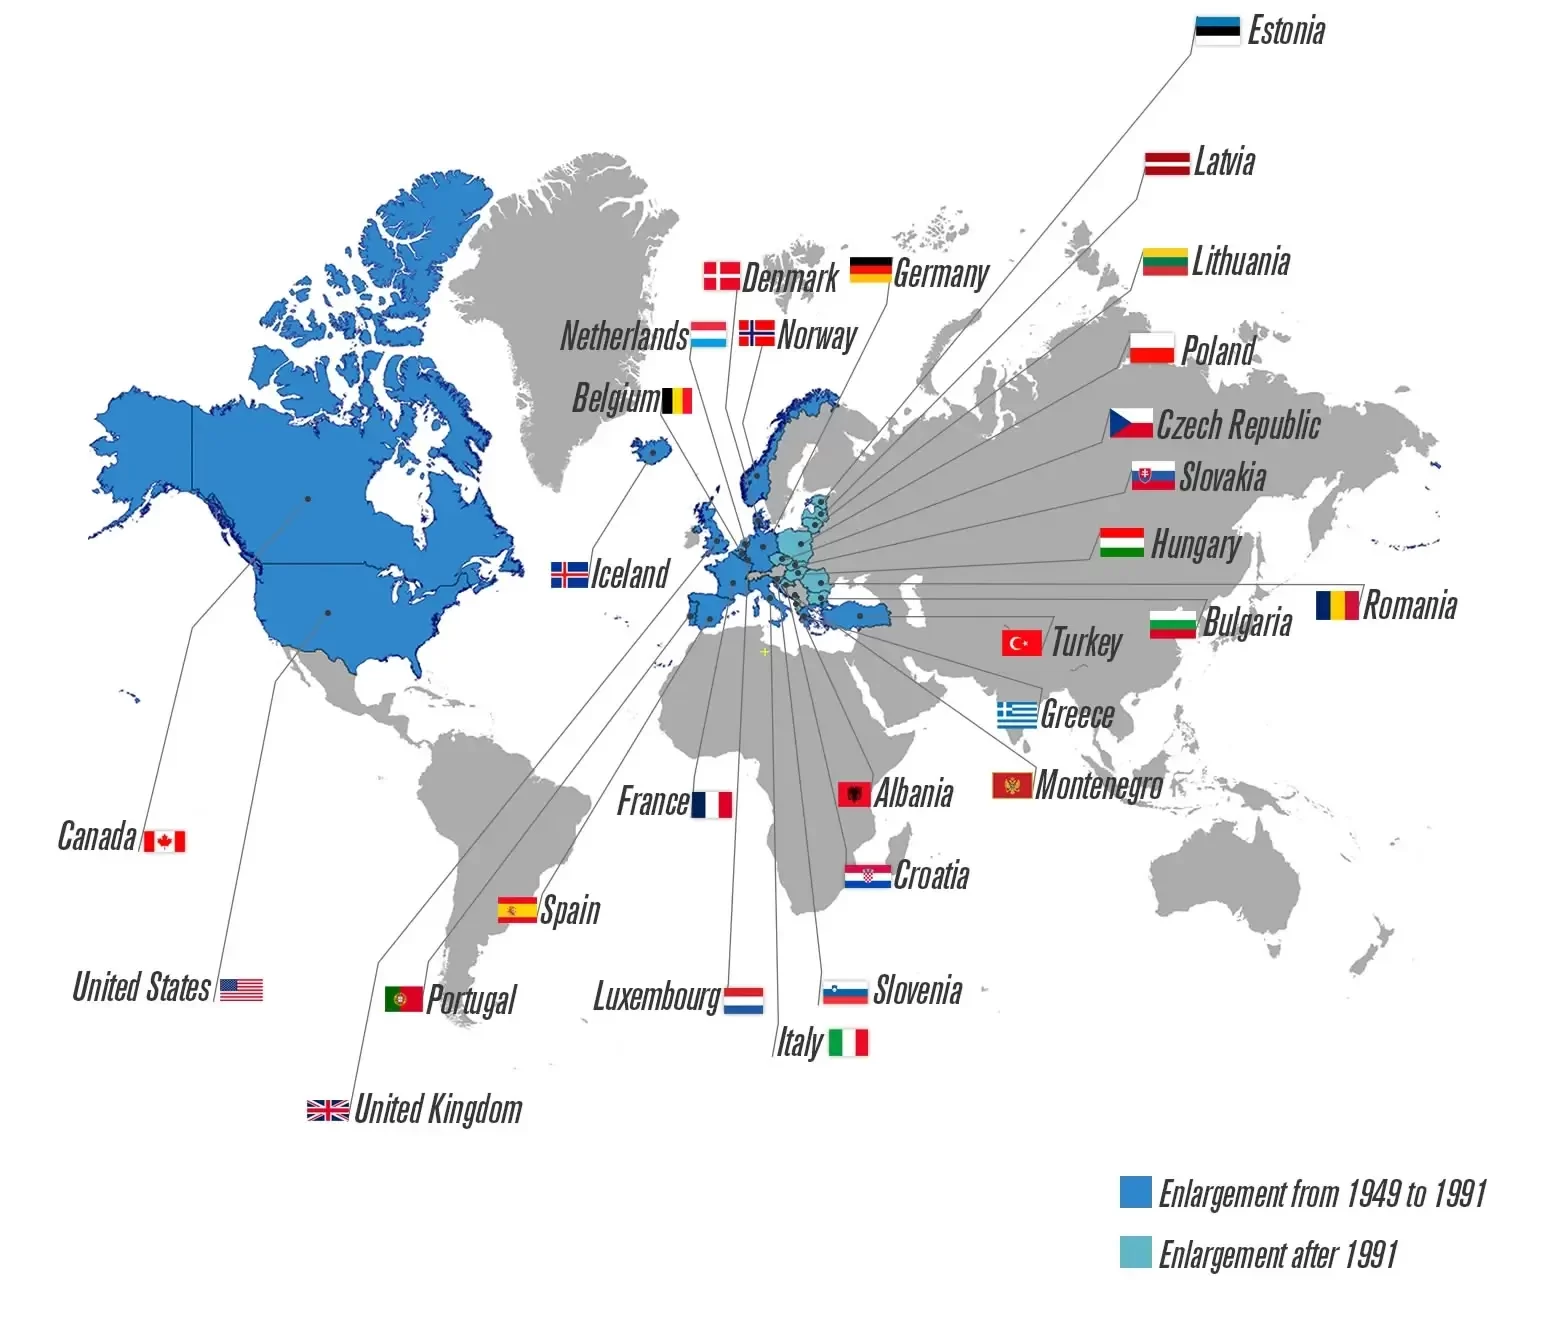 A world map illustrating NATO member countries and partnership networks, emphasizing the global reach of its security initiatives.